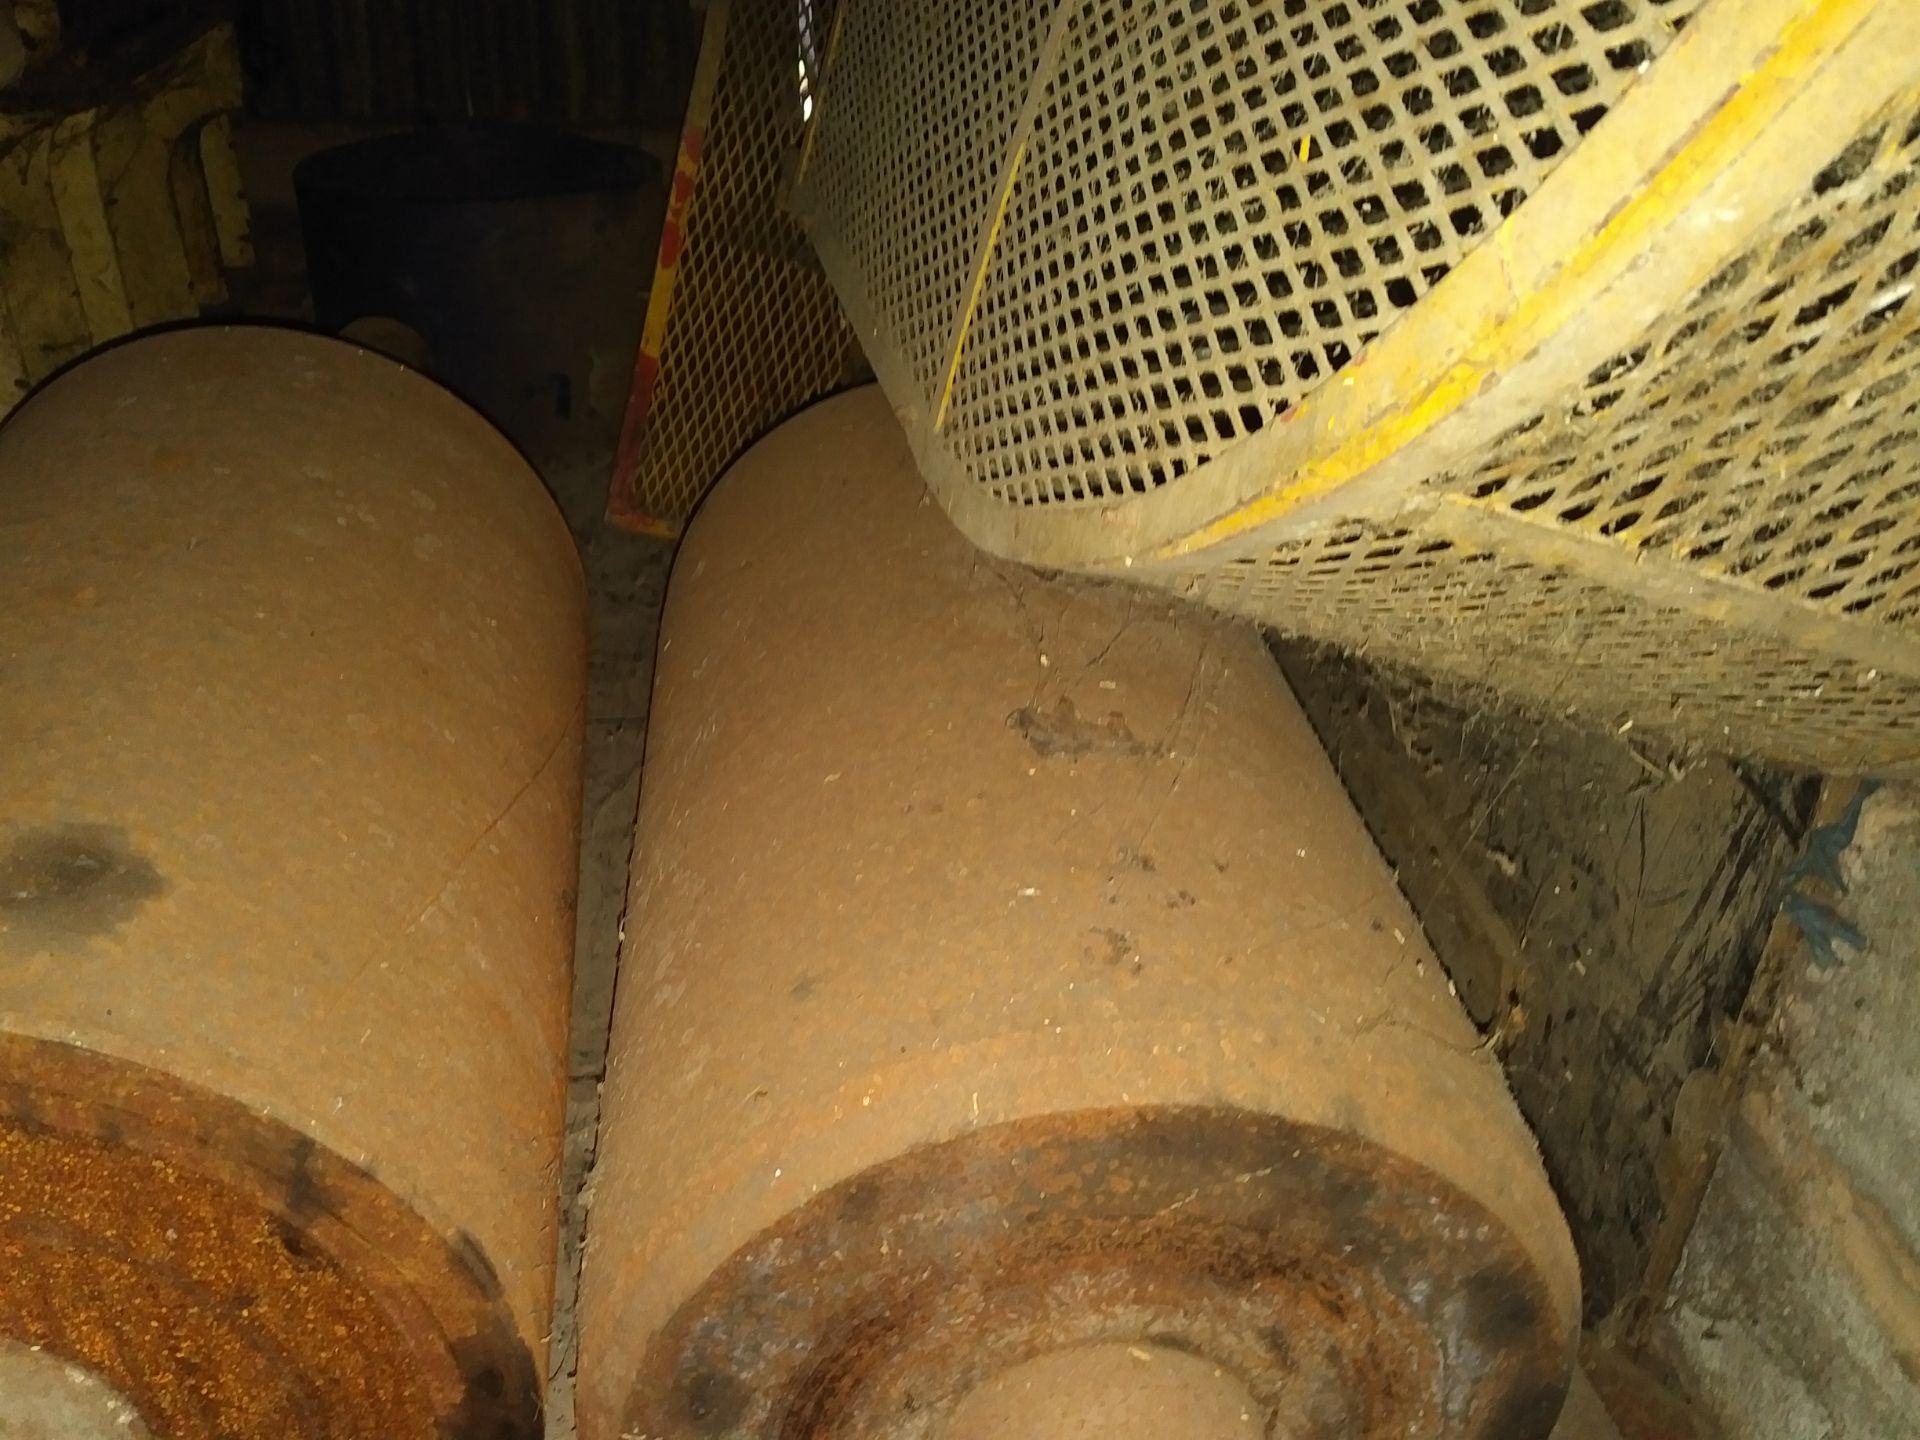 Pair of Replacement Flaking Rolls - Image 2 of 3